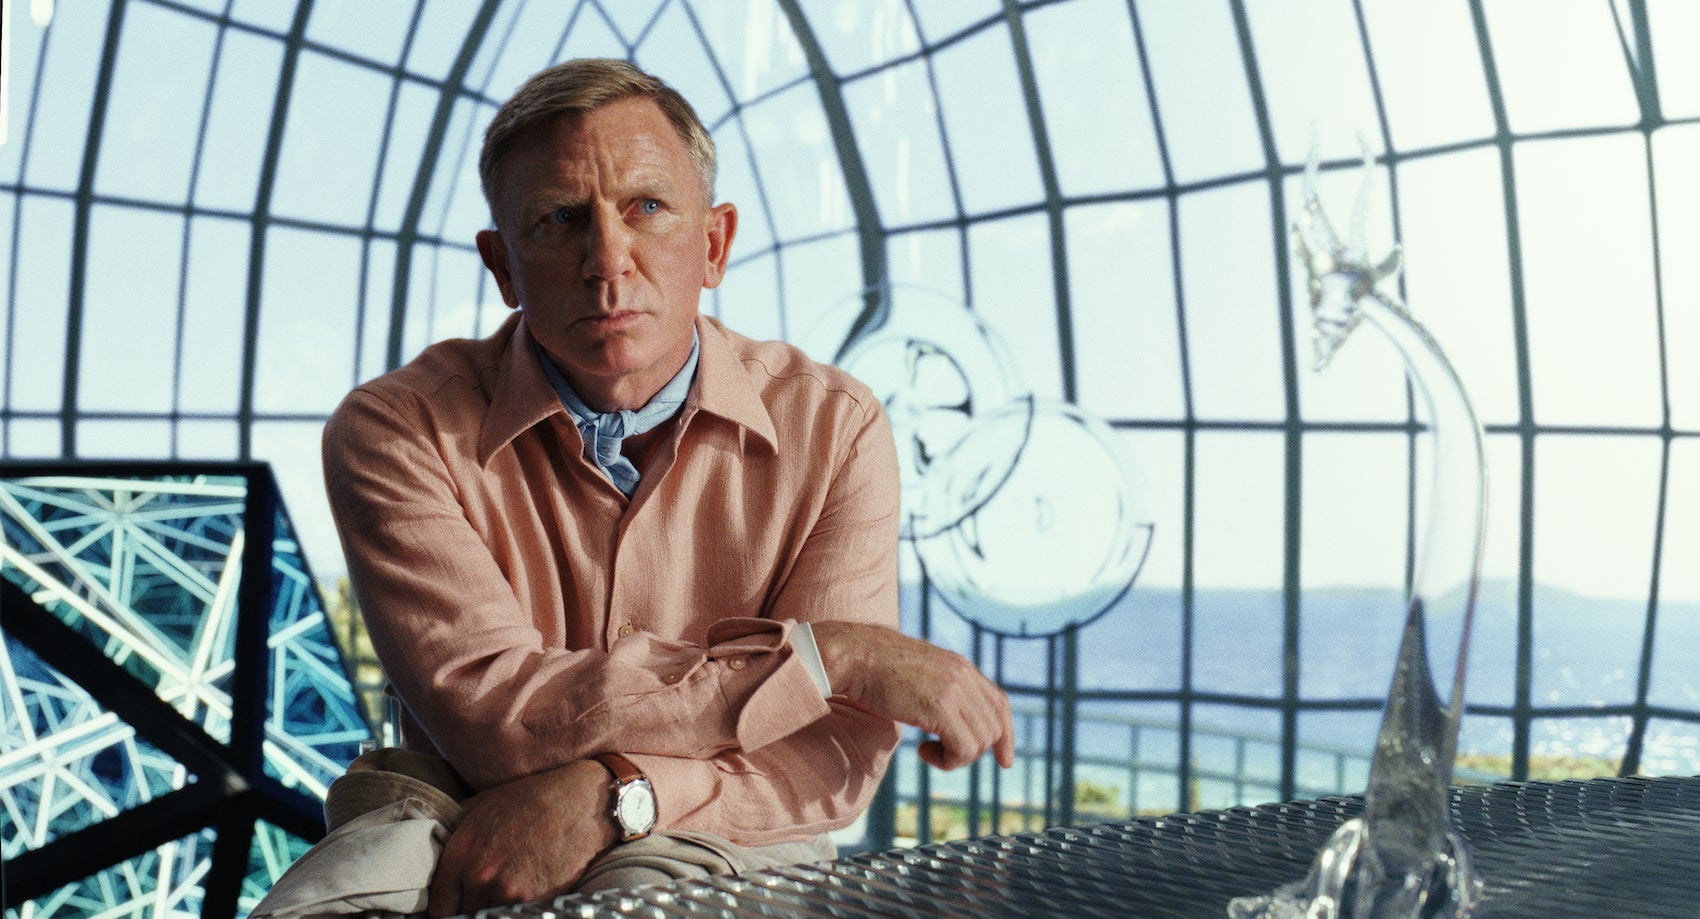 Daniel Craig as Detective Benoit Blanc in "Glass Onion: A Knives Out Mystery."